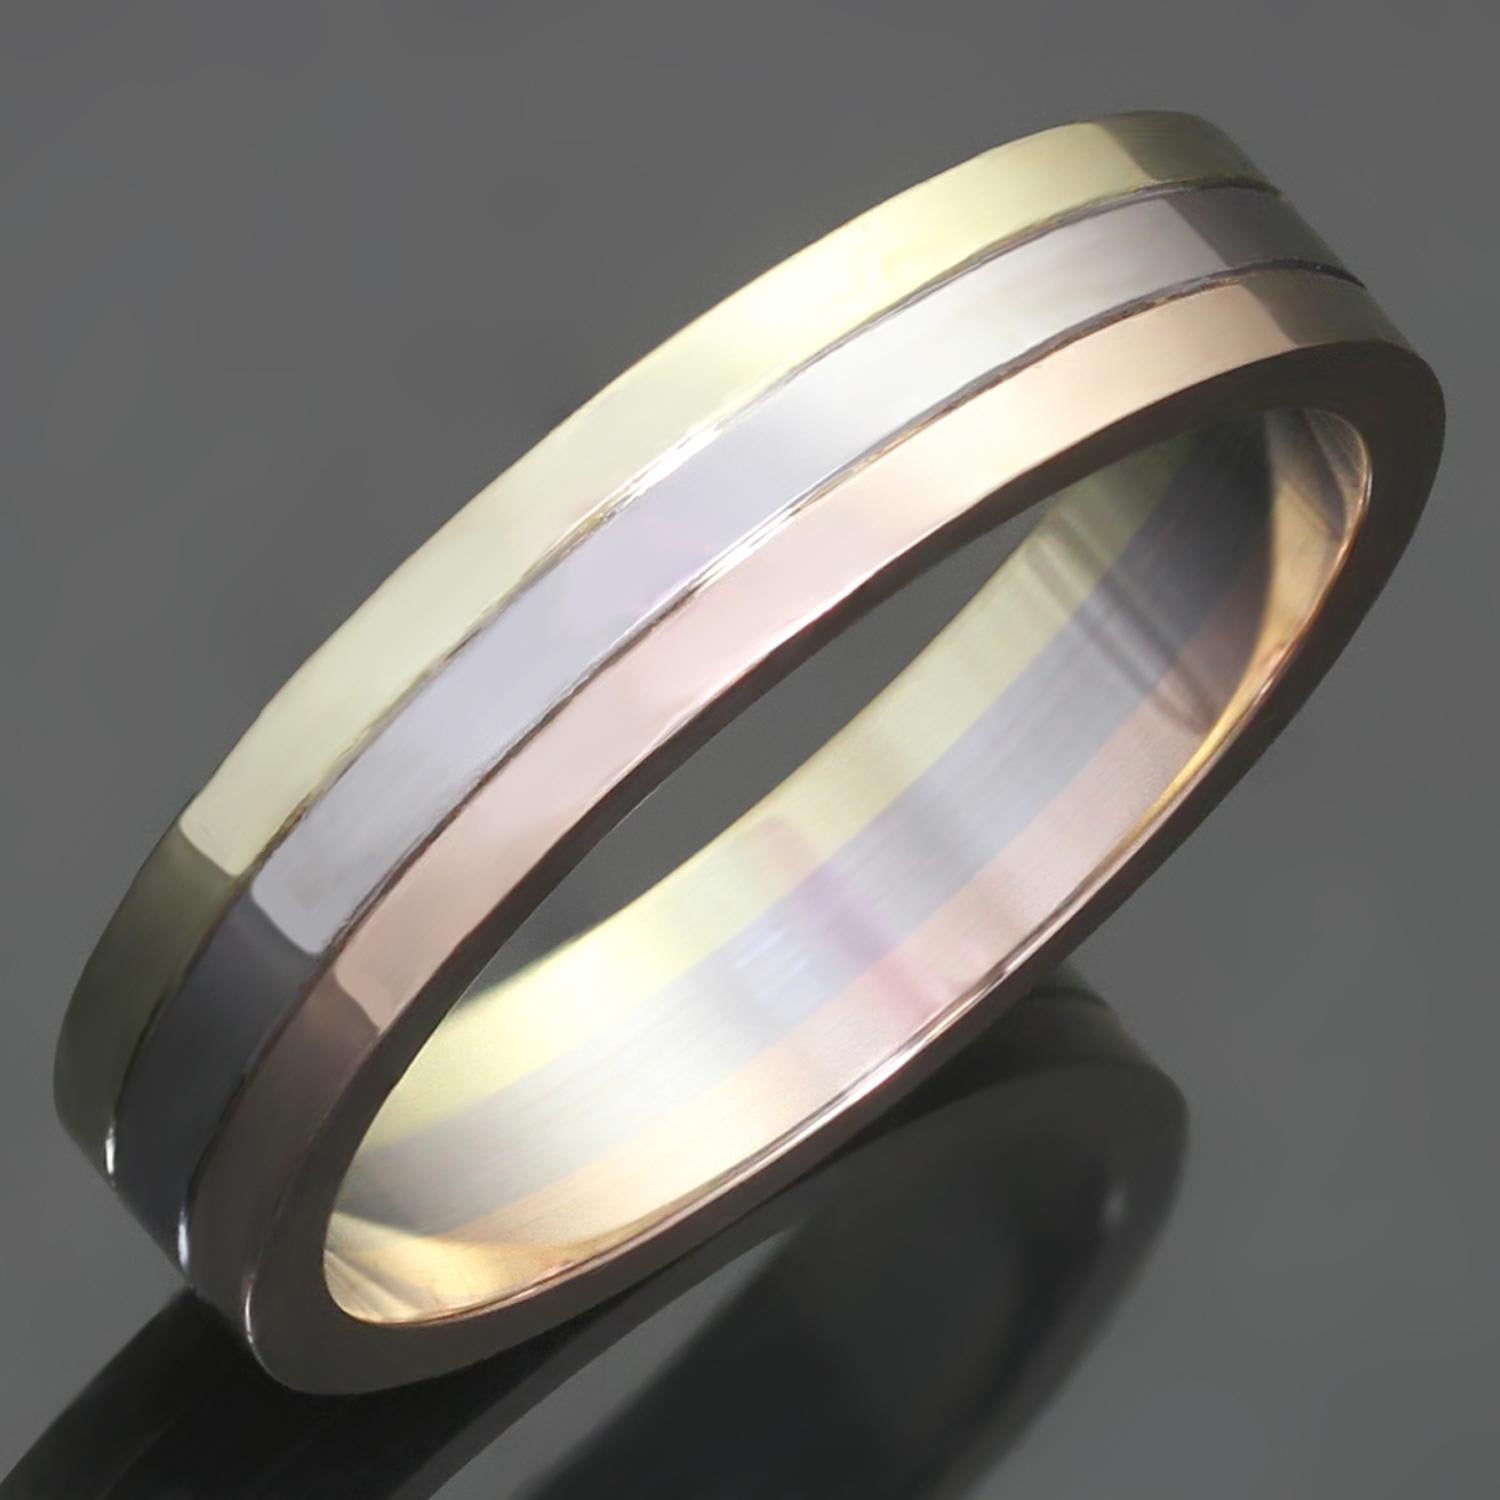 This gorgeous wedding band from Cartier's iconic Trinity collection is crafted in 18k yellow, white, and rose gold. gold, 18K white gold. Made in France circa 2010s. Measurements: 0.19